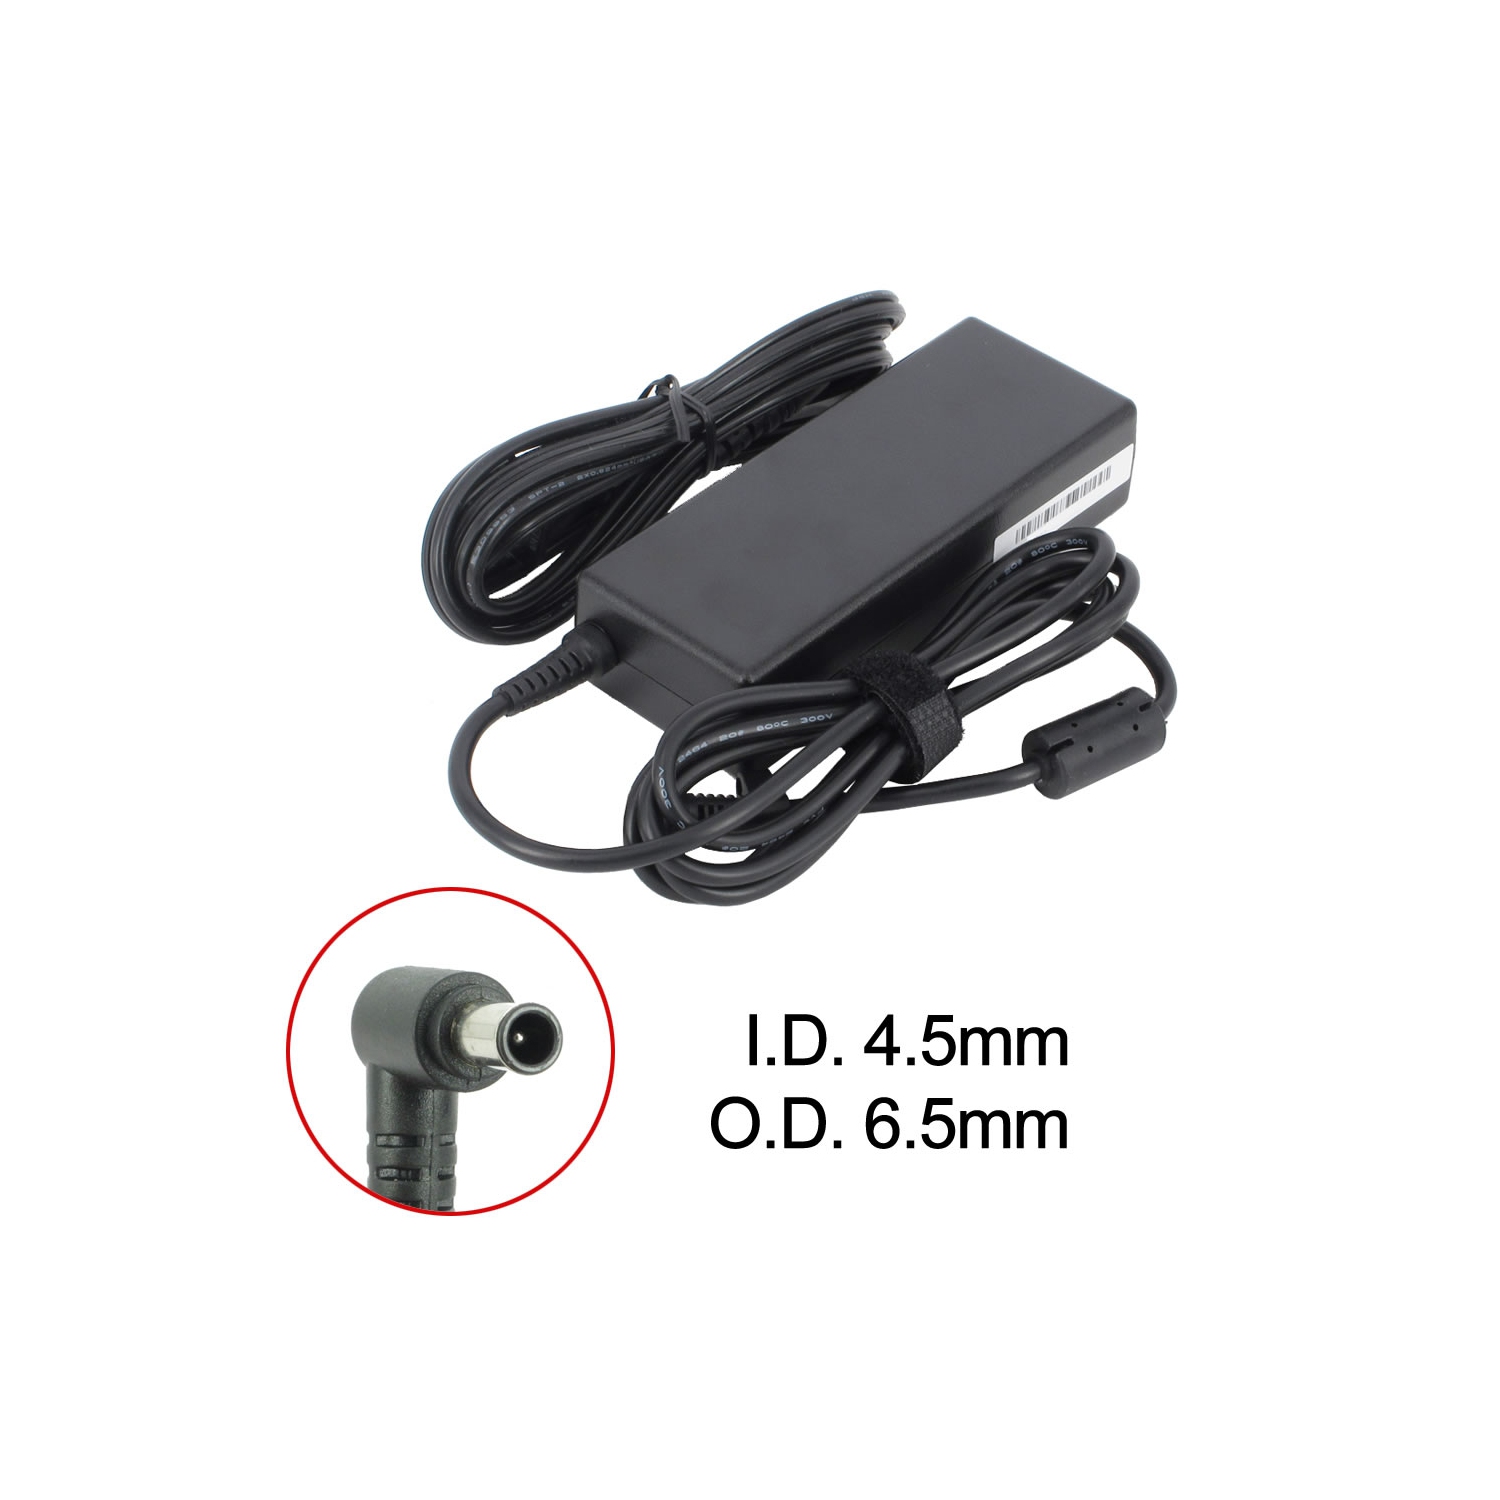 Brand New Laptop AC Adapter for LG XNOTE A410, ADP-90TH A, PCGA-AC19V19, VGP-AC19V14, VGP-AC19V26, VGP-AC19V43